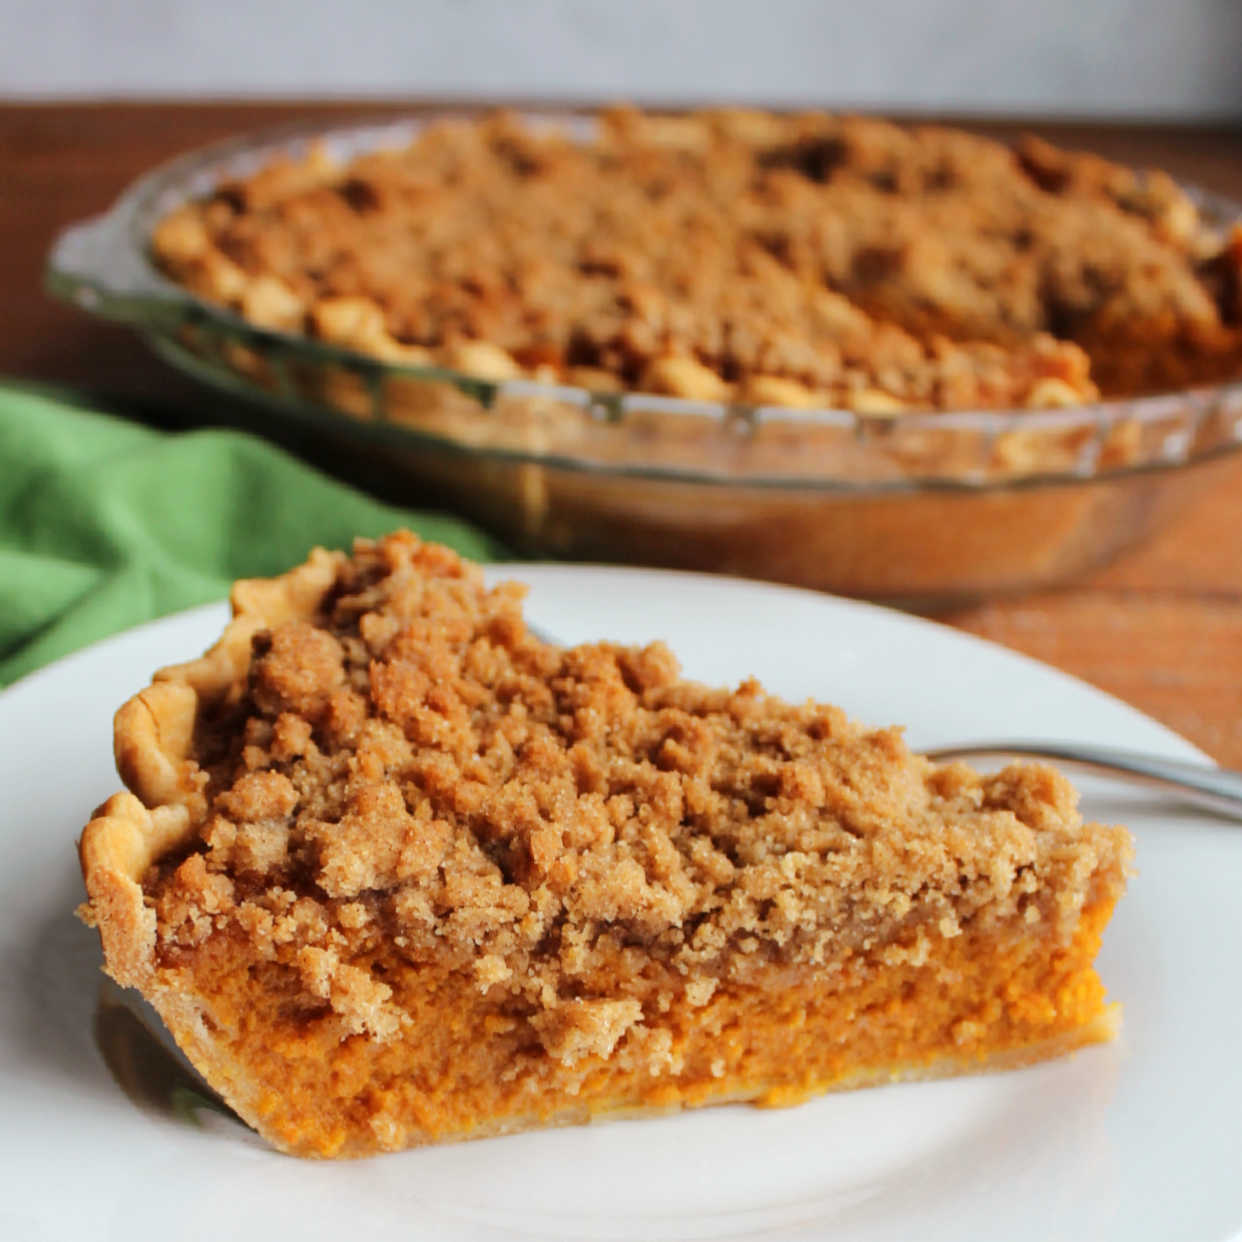 Slice of carrot pie with smooth orange filling topped with buttery crumble topping, ready to eat.